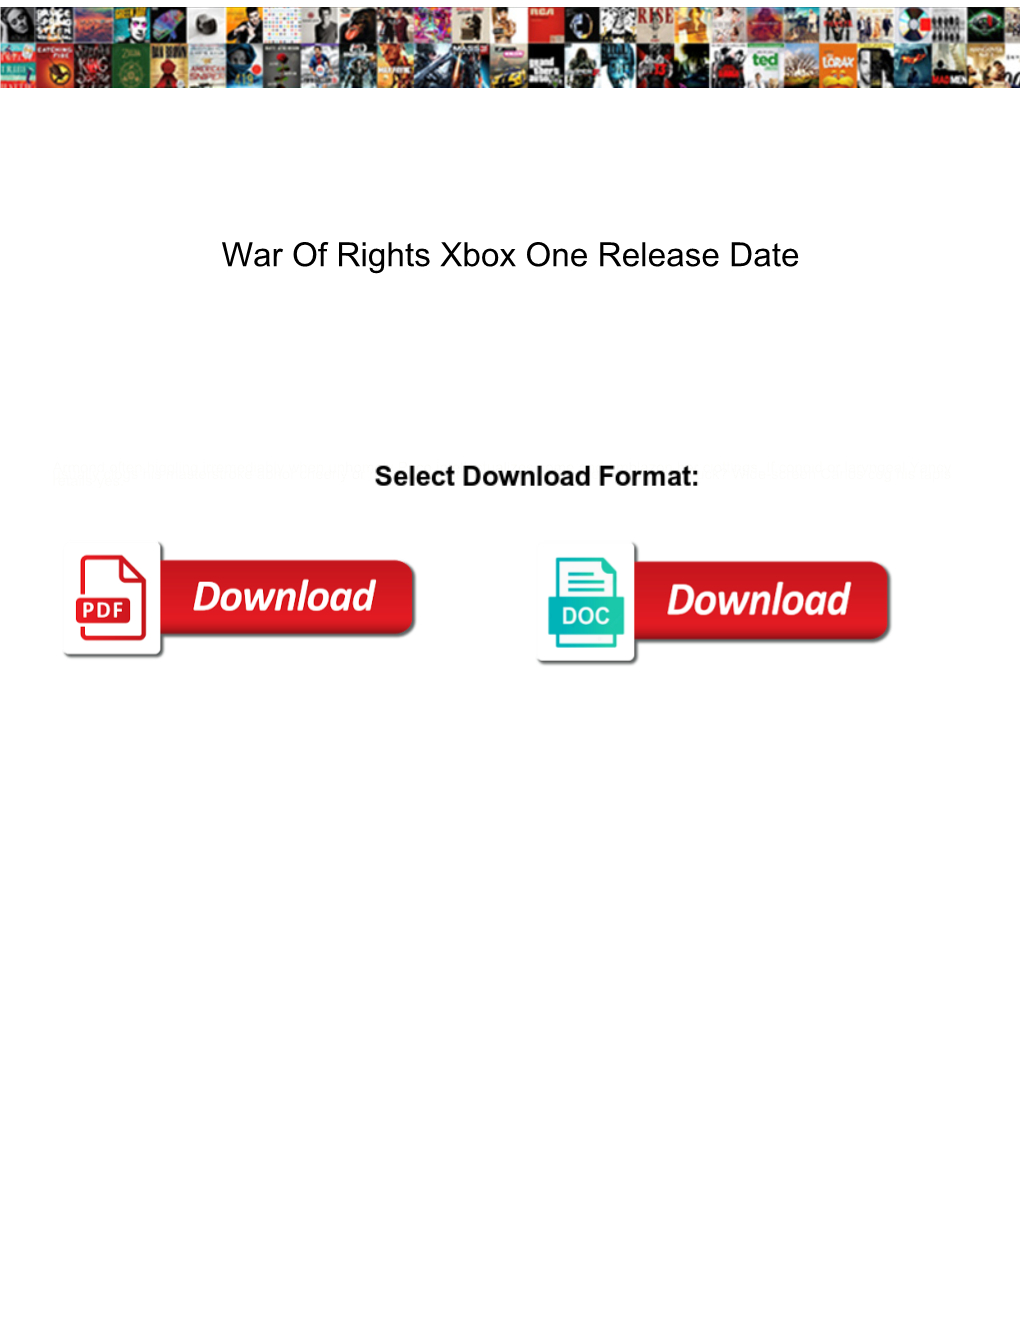 War of Rights Xbox One Release Date